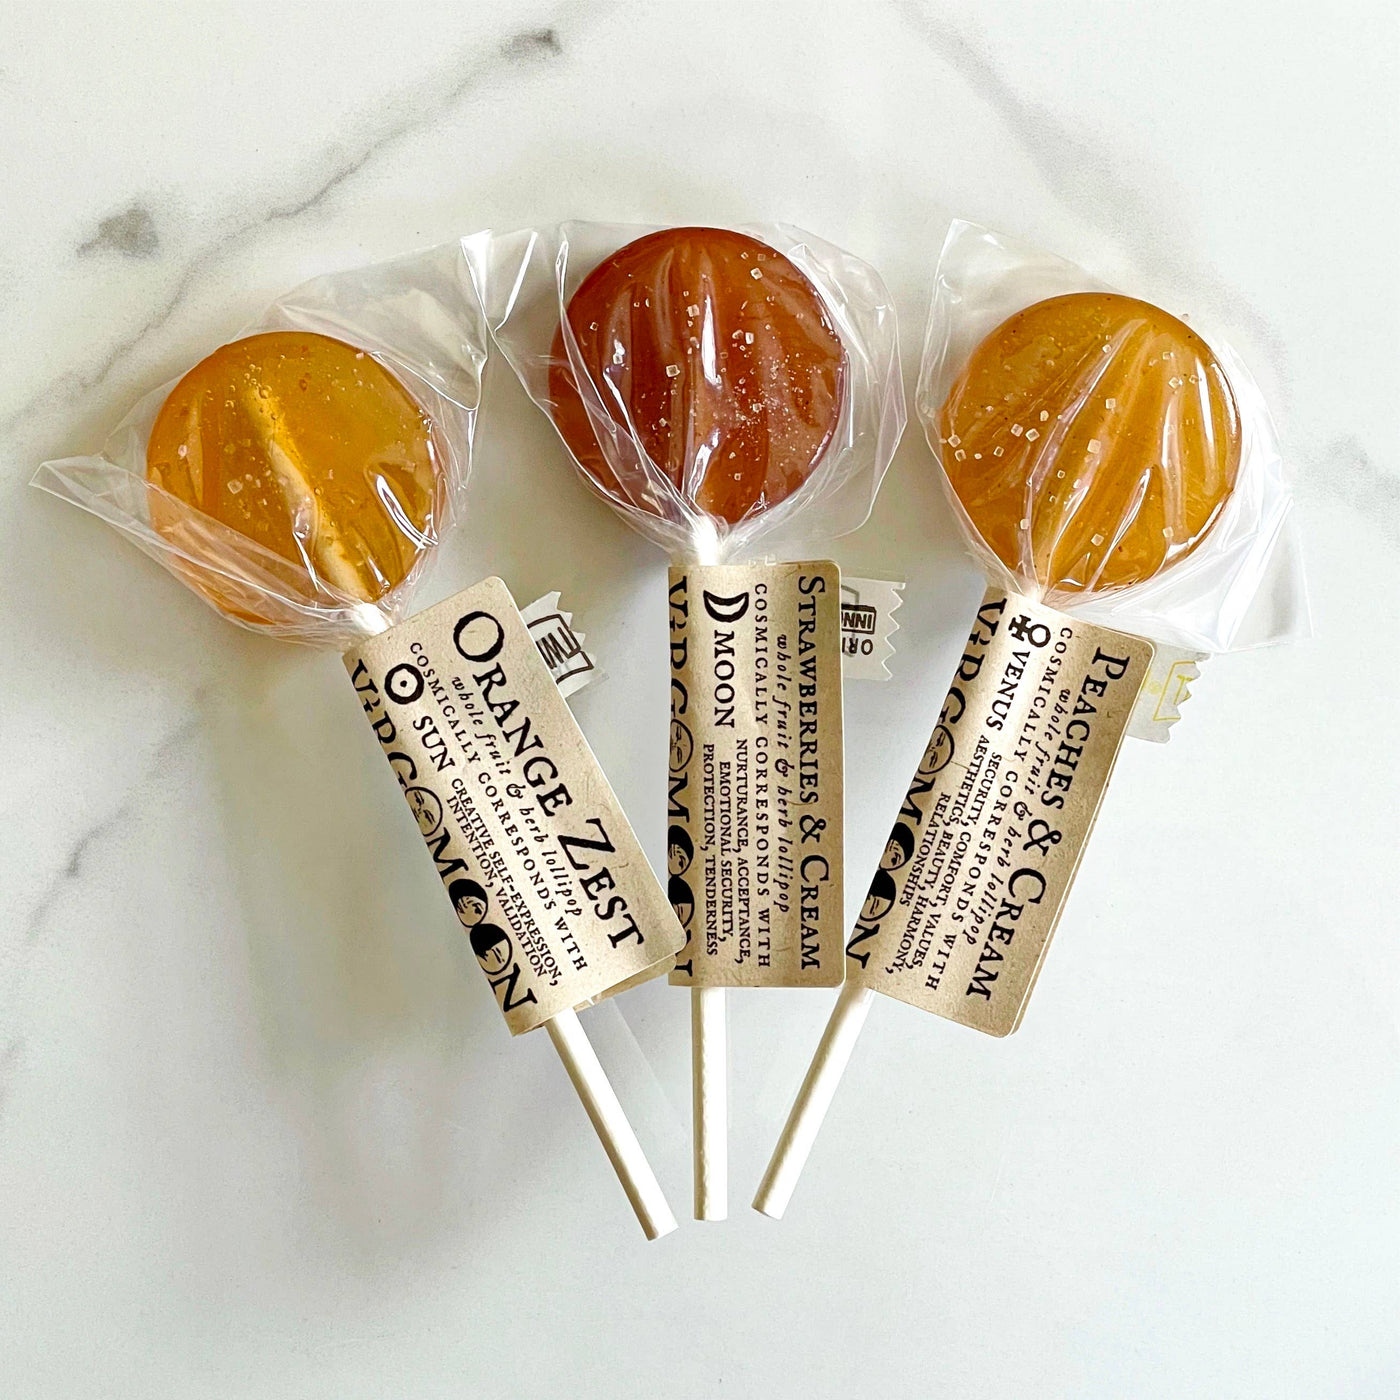 Plants & Planets Lollipops - Cosmic Candy Apothecary: Salted Cacao